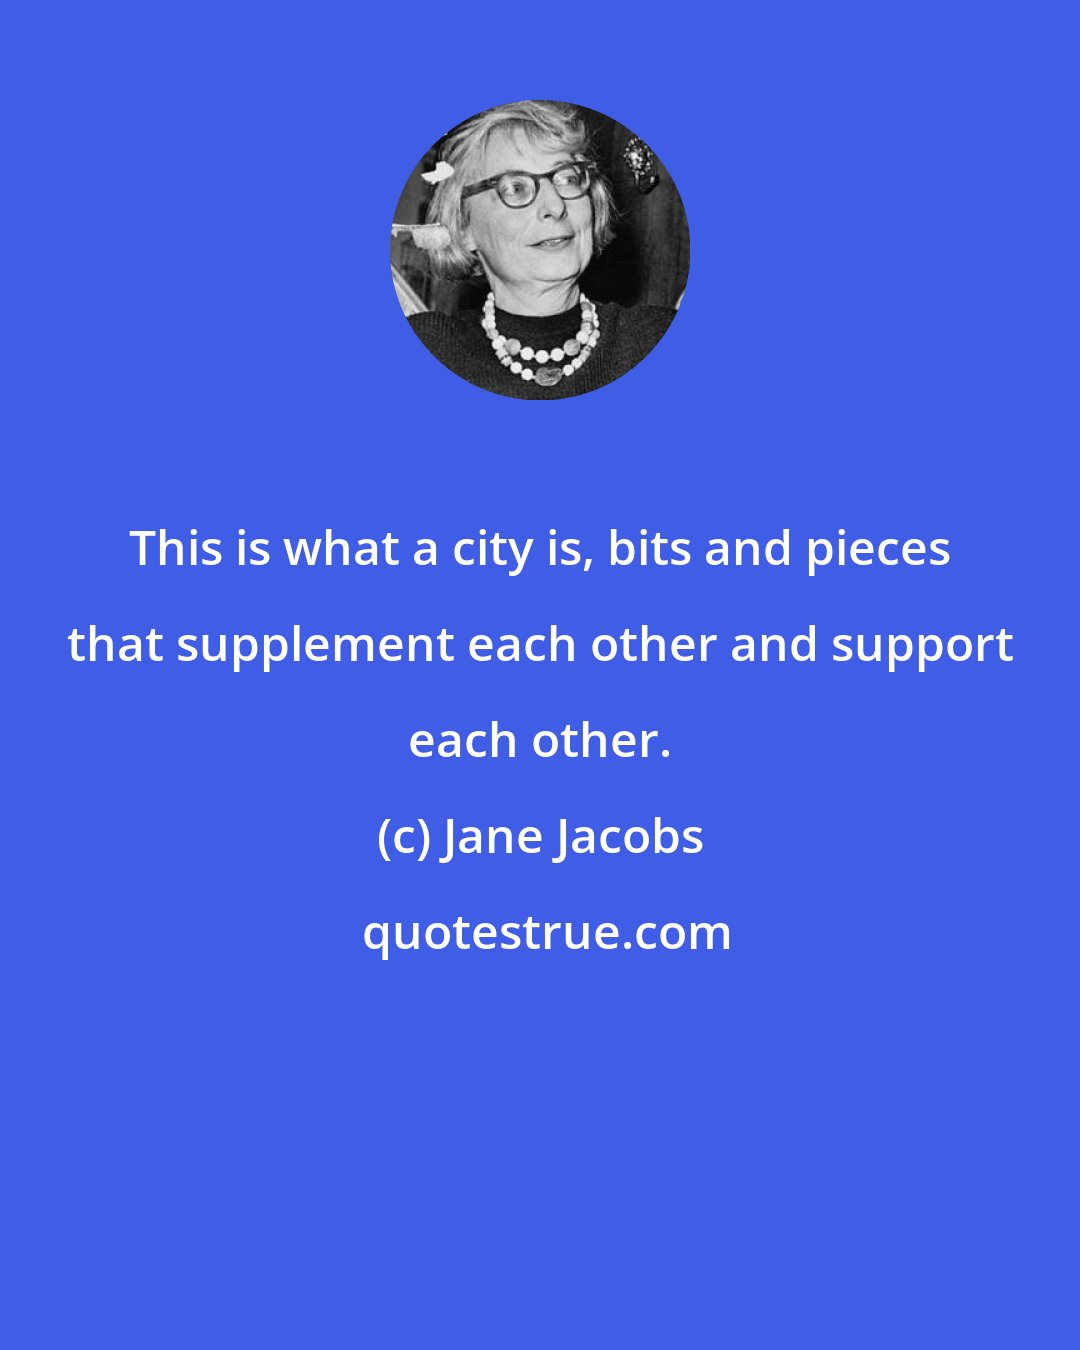 Jane Jacobs: This is what a city is, bits and pieces that supplement each other and support each other.